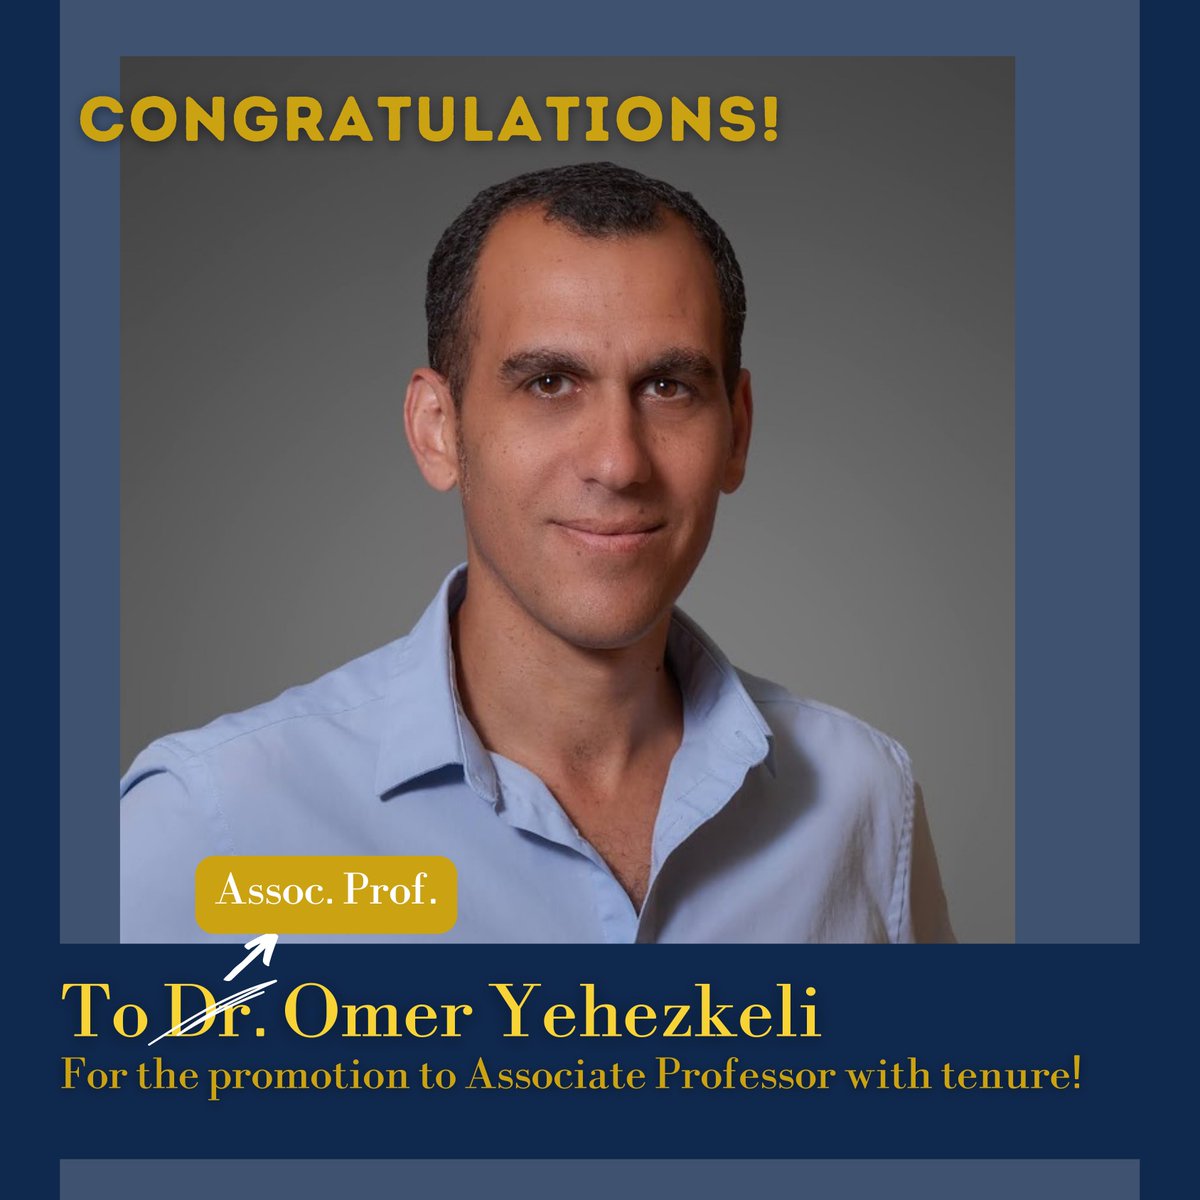 We are so proud of our Faculty member, Omer Yehezkeli @YehezkeliL for the promotion to Associate Professor with tenure! Assoc. Prof. Yehezkeli is one of our brightest stars, with new achievements and academic awards by the hour, we can't wait to see what he accomplishes next!